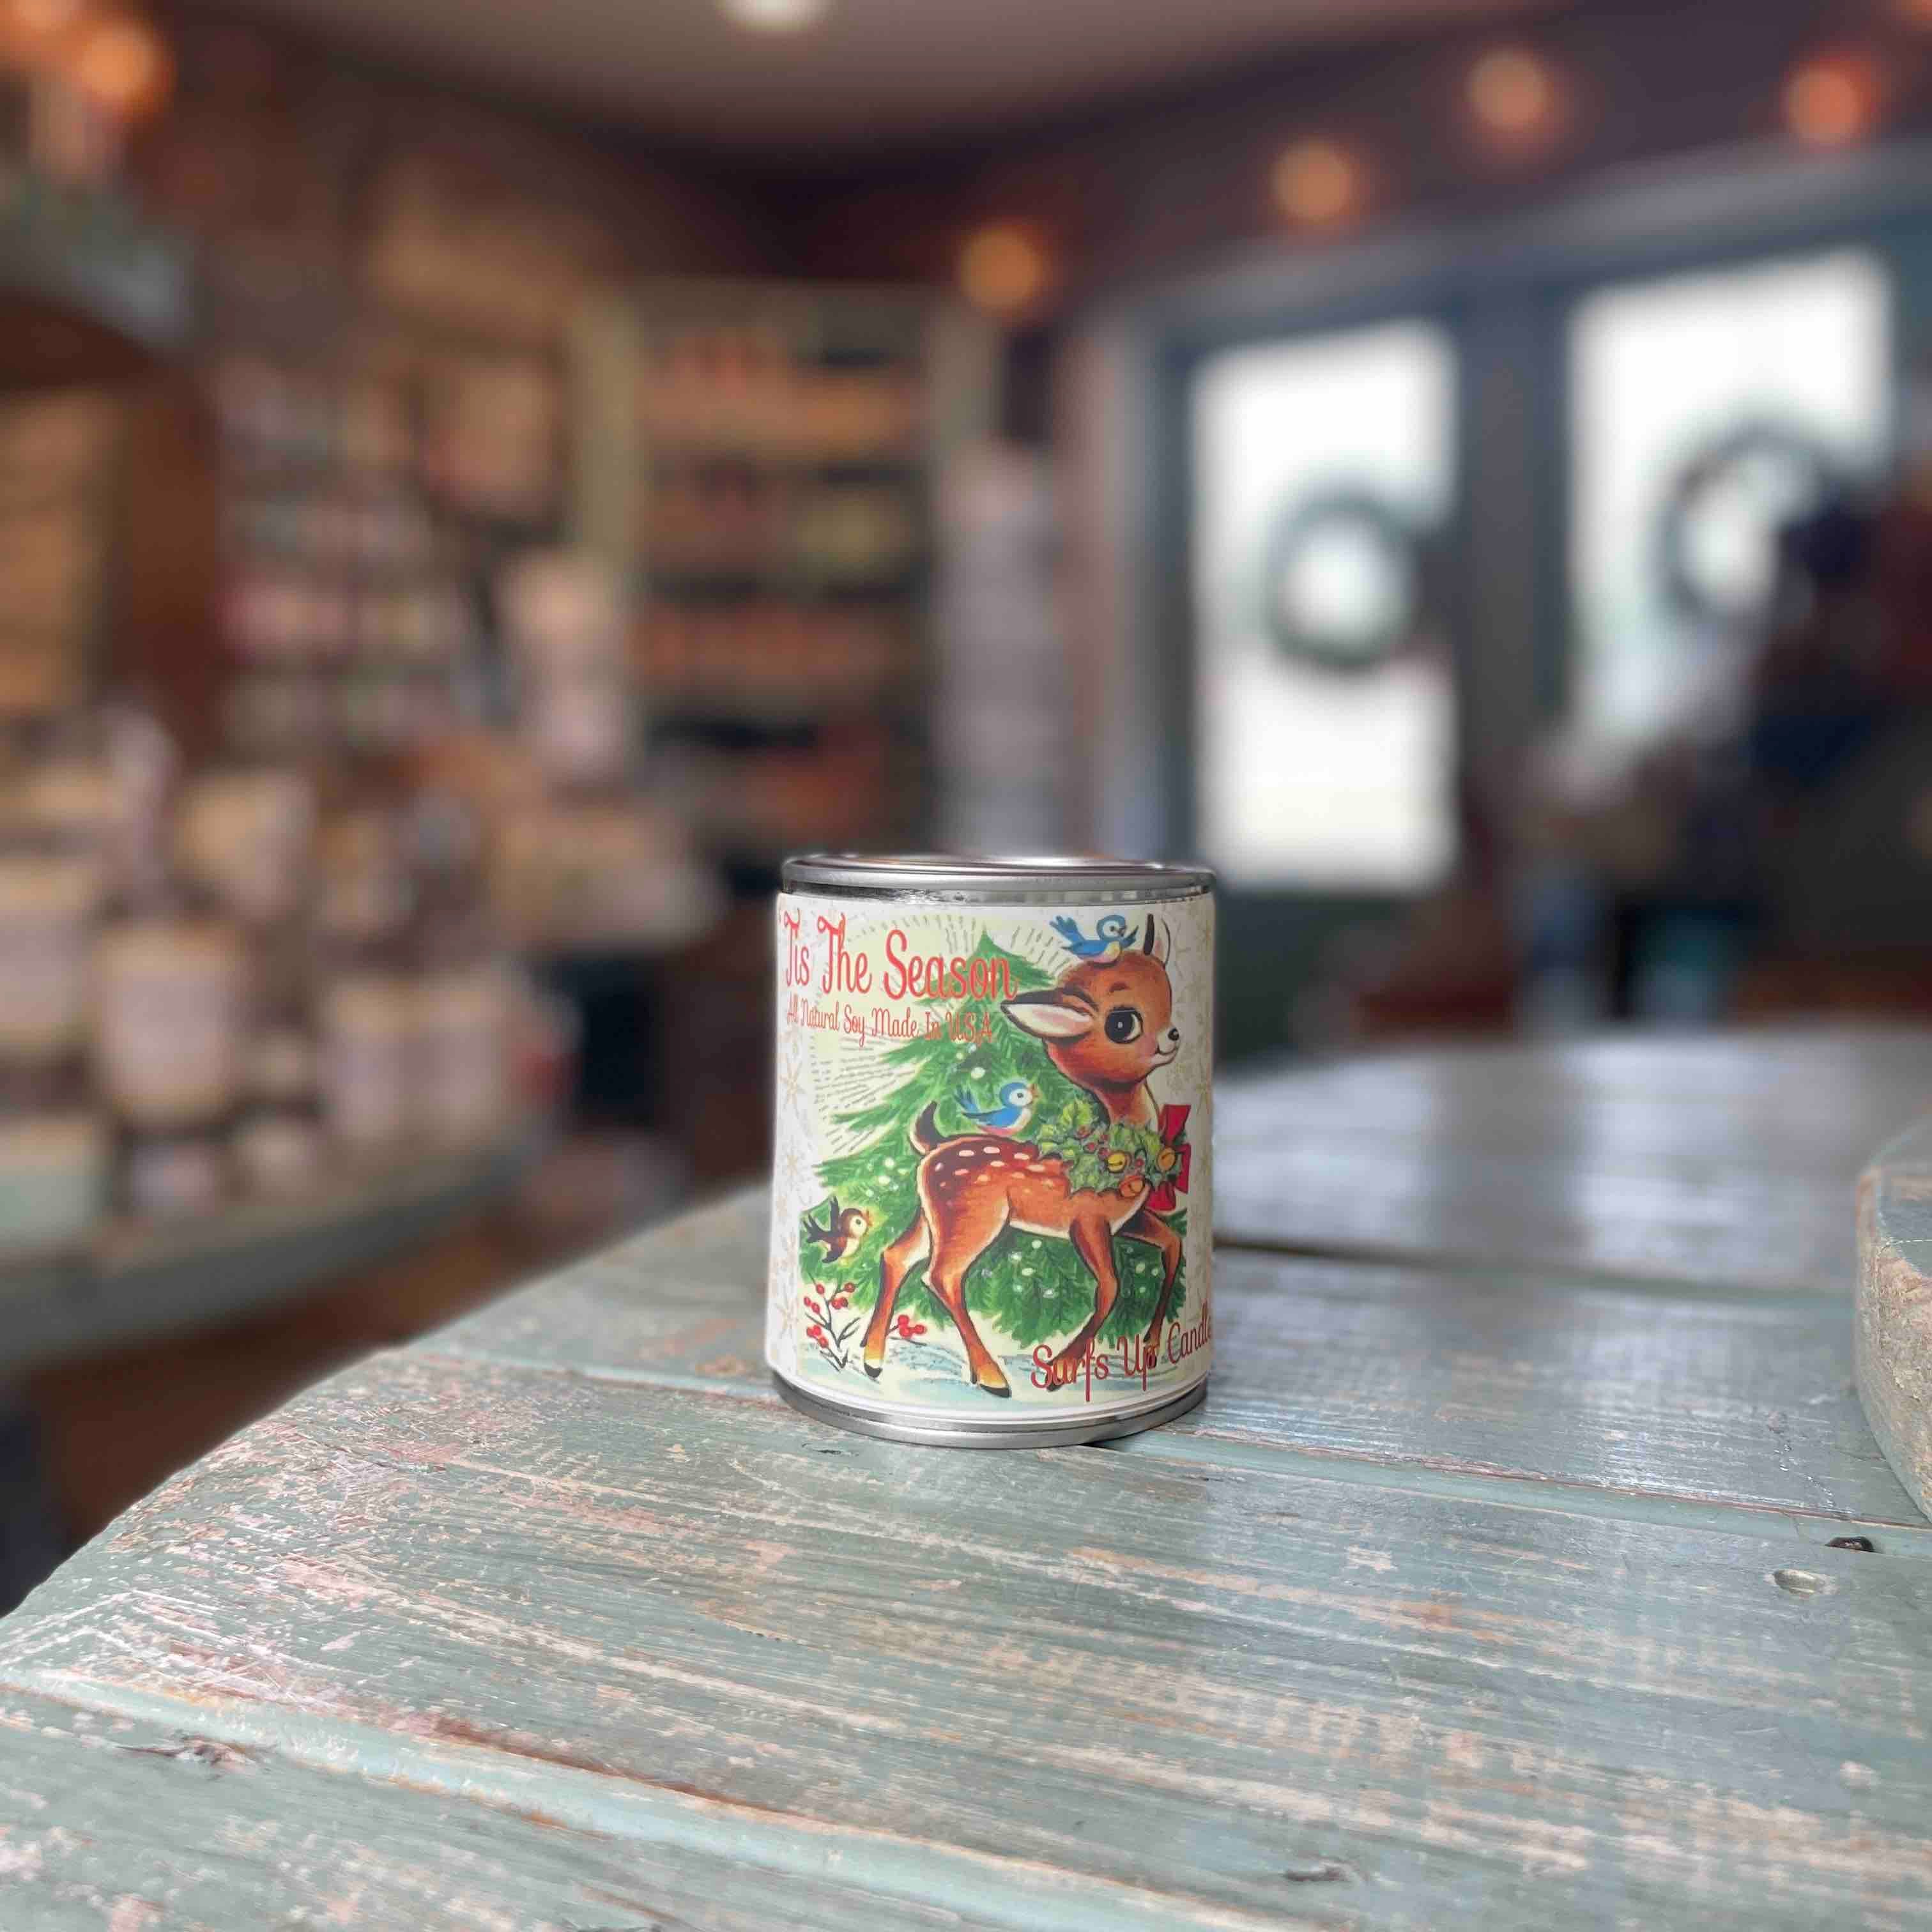 Tis the Season Paint Can Candle - Vintage Collection